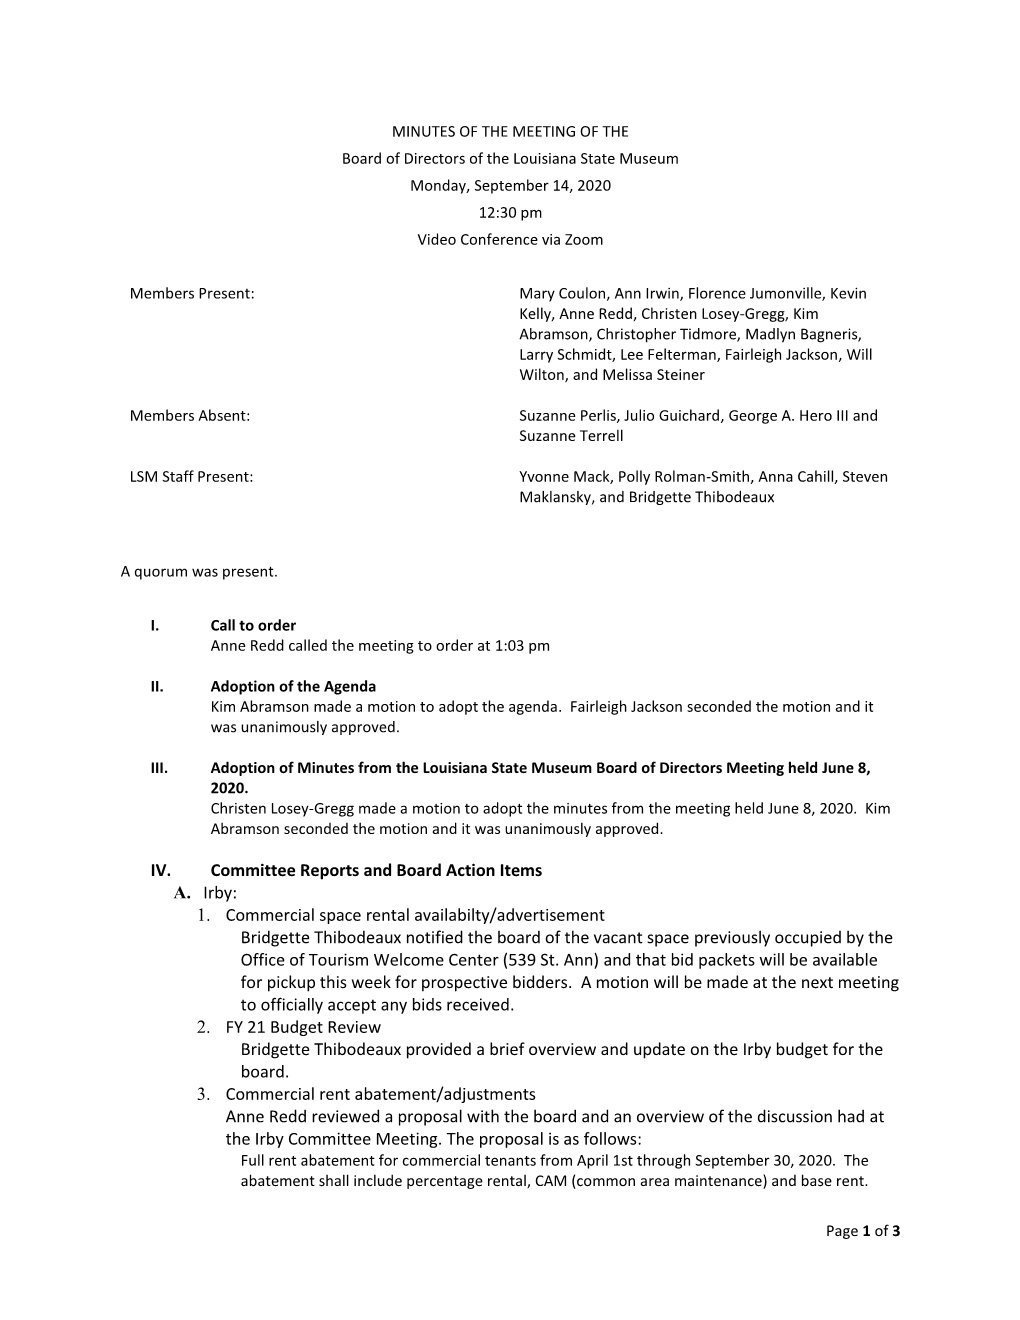 IV. Committee Reports and Board Action Items A